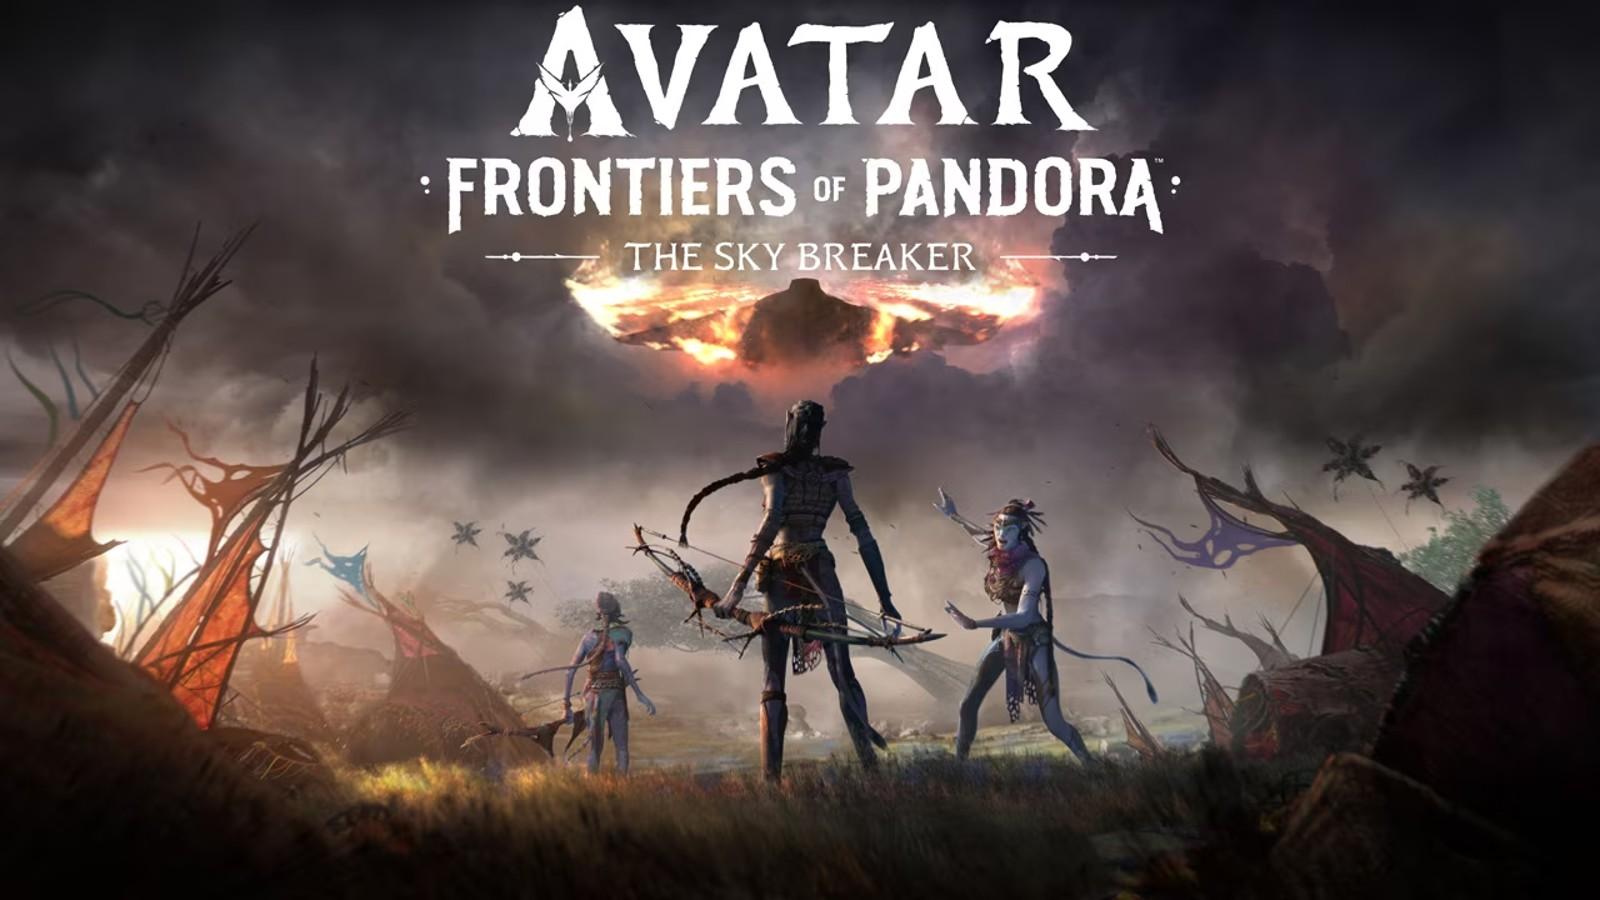 AVATAR 2022 Official Trailer, Frontiers of Pandora